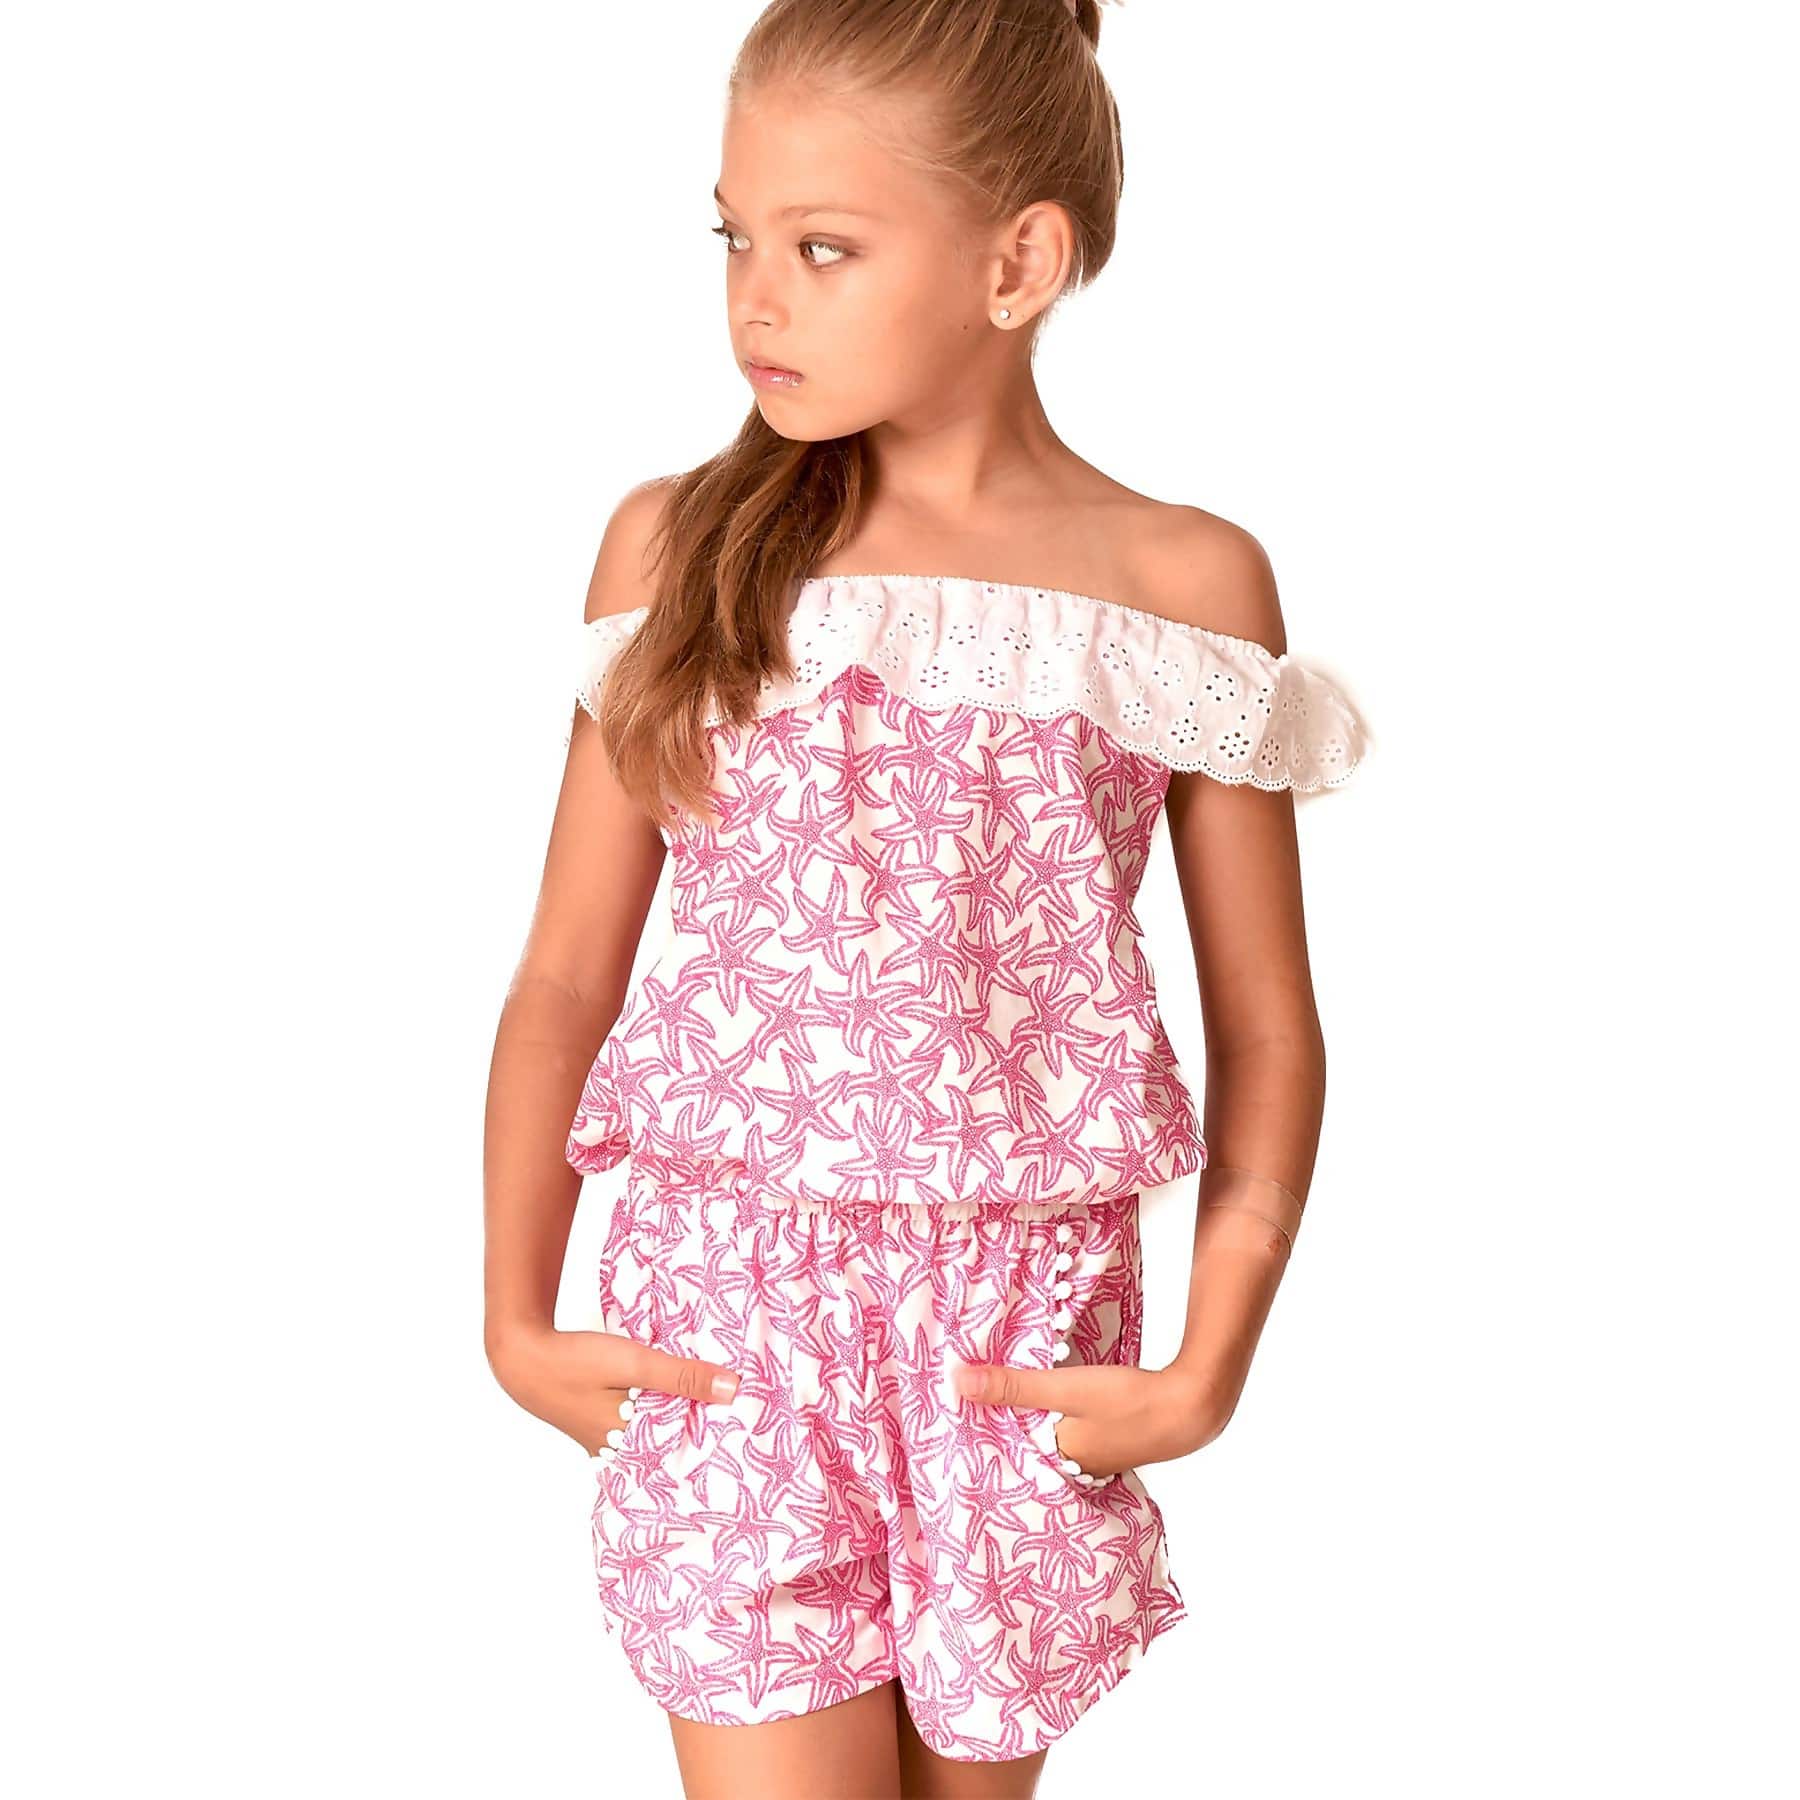 Little Girl Models Young 12 16